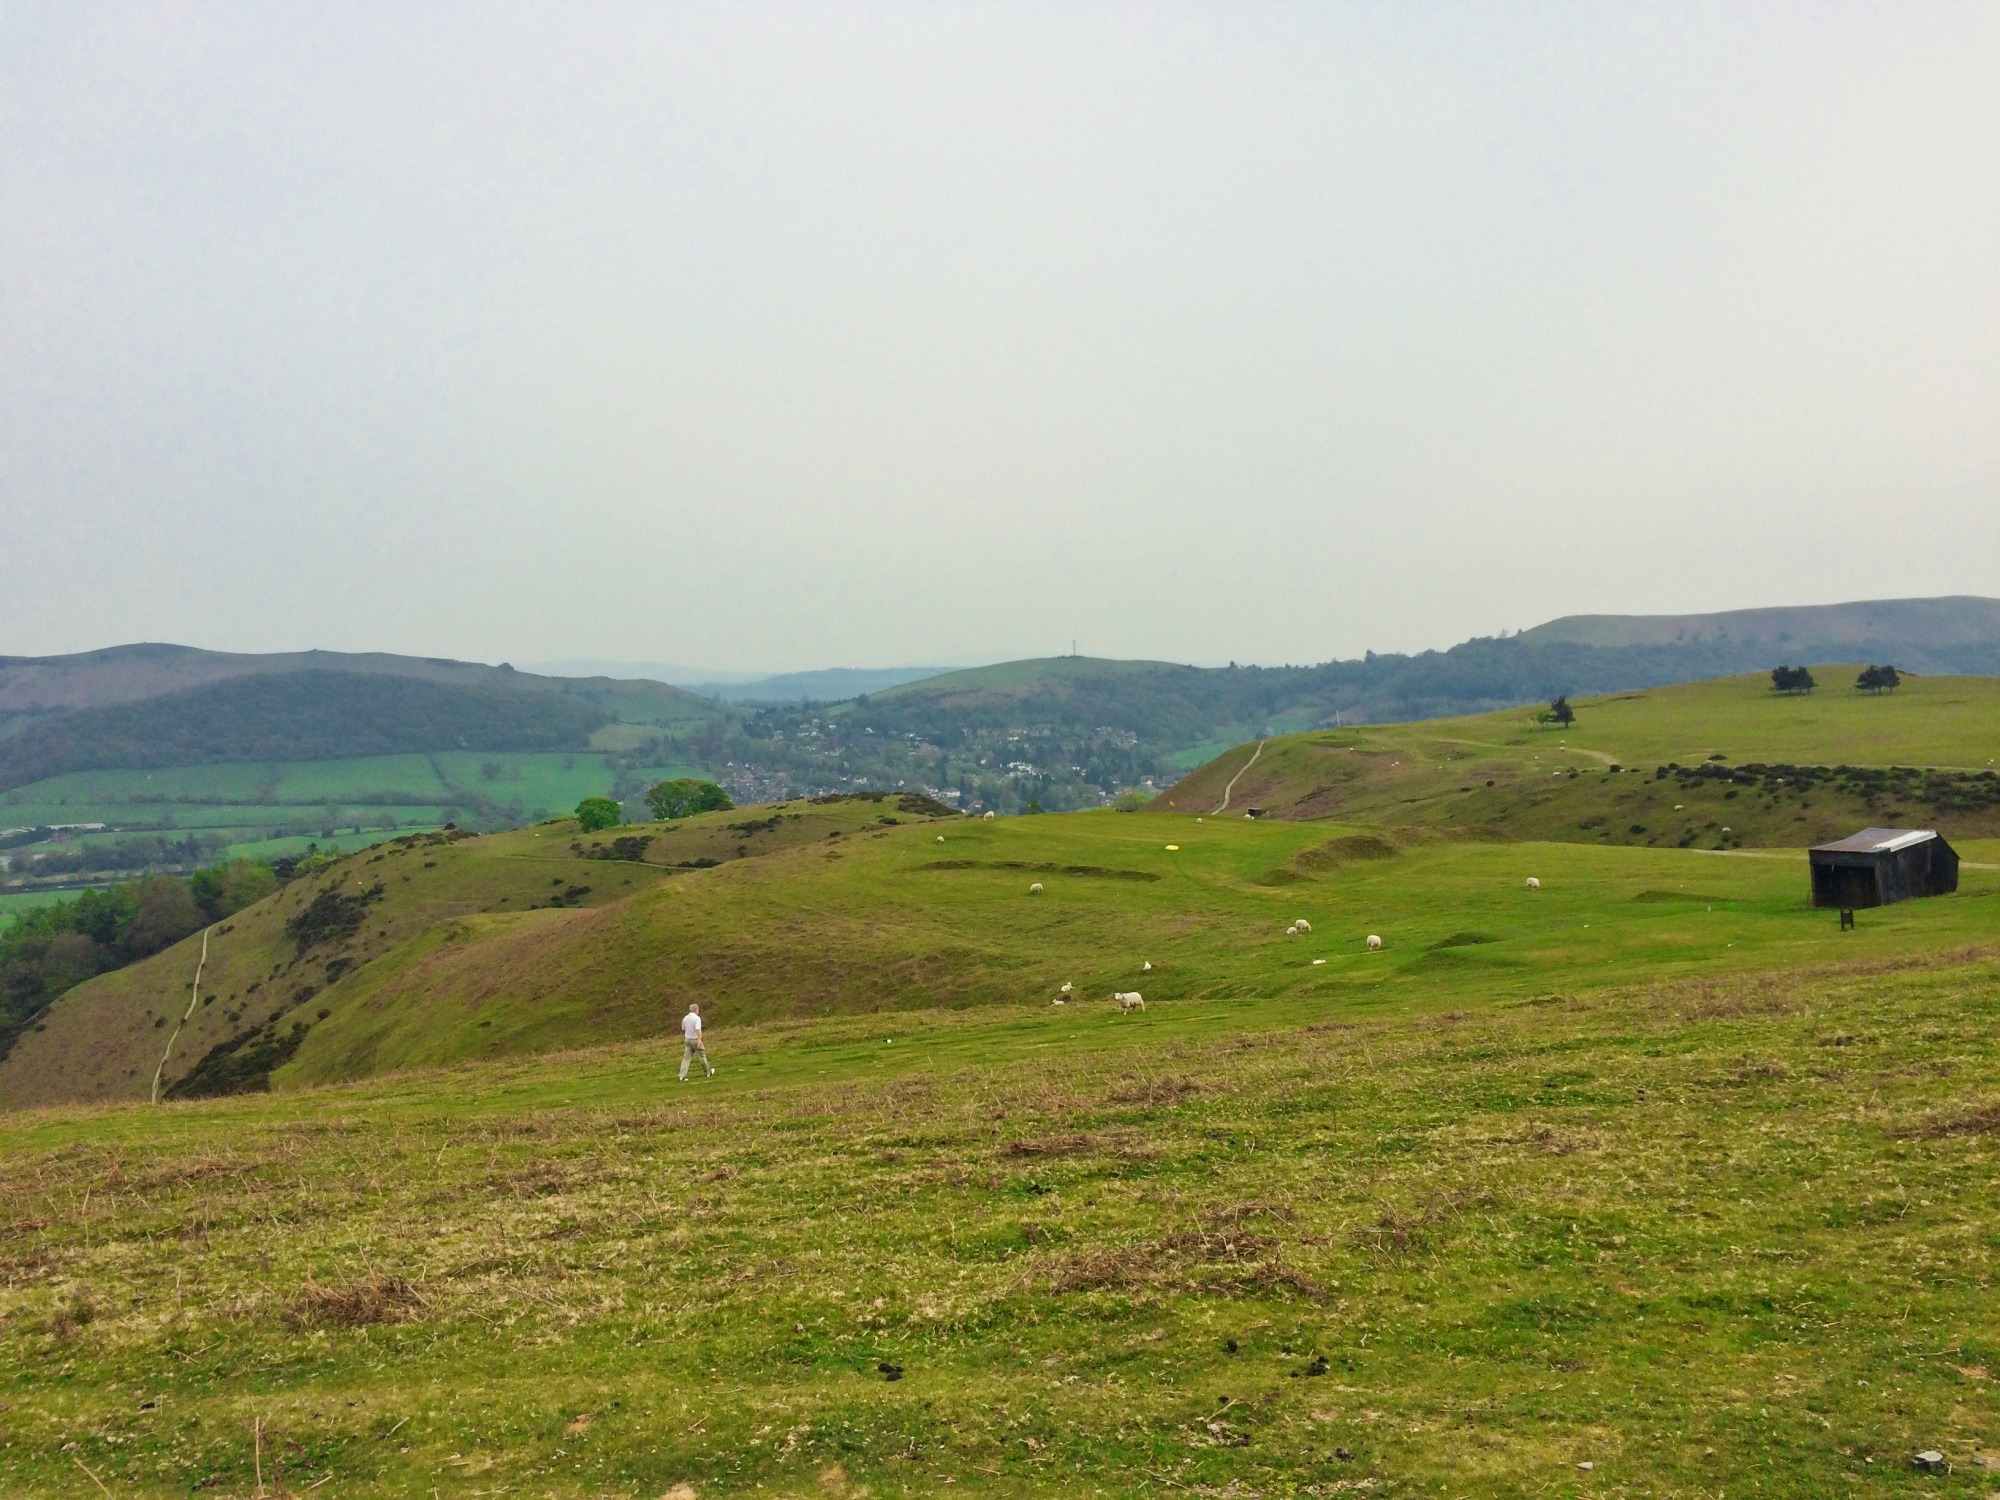 Golf course on top of the Long Mynd